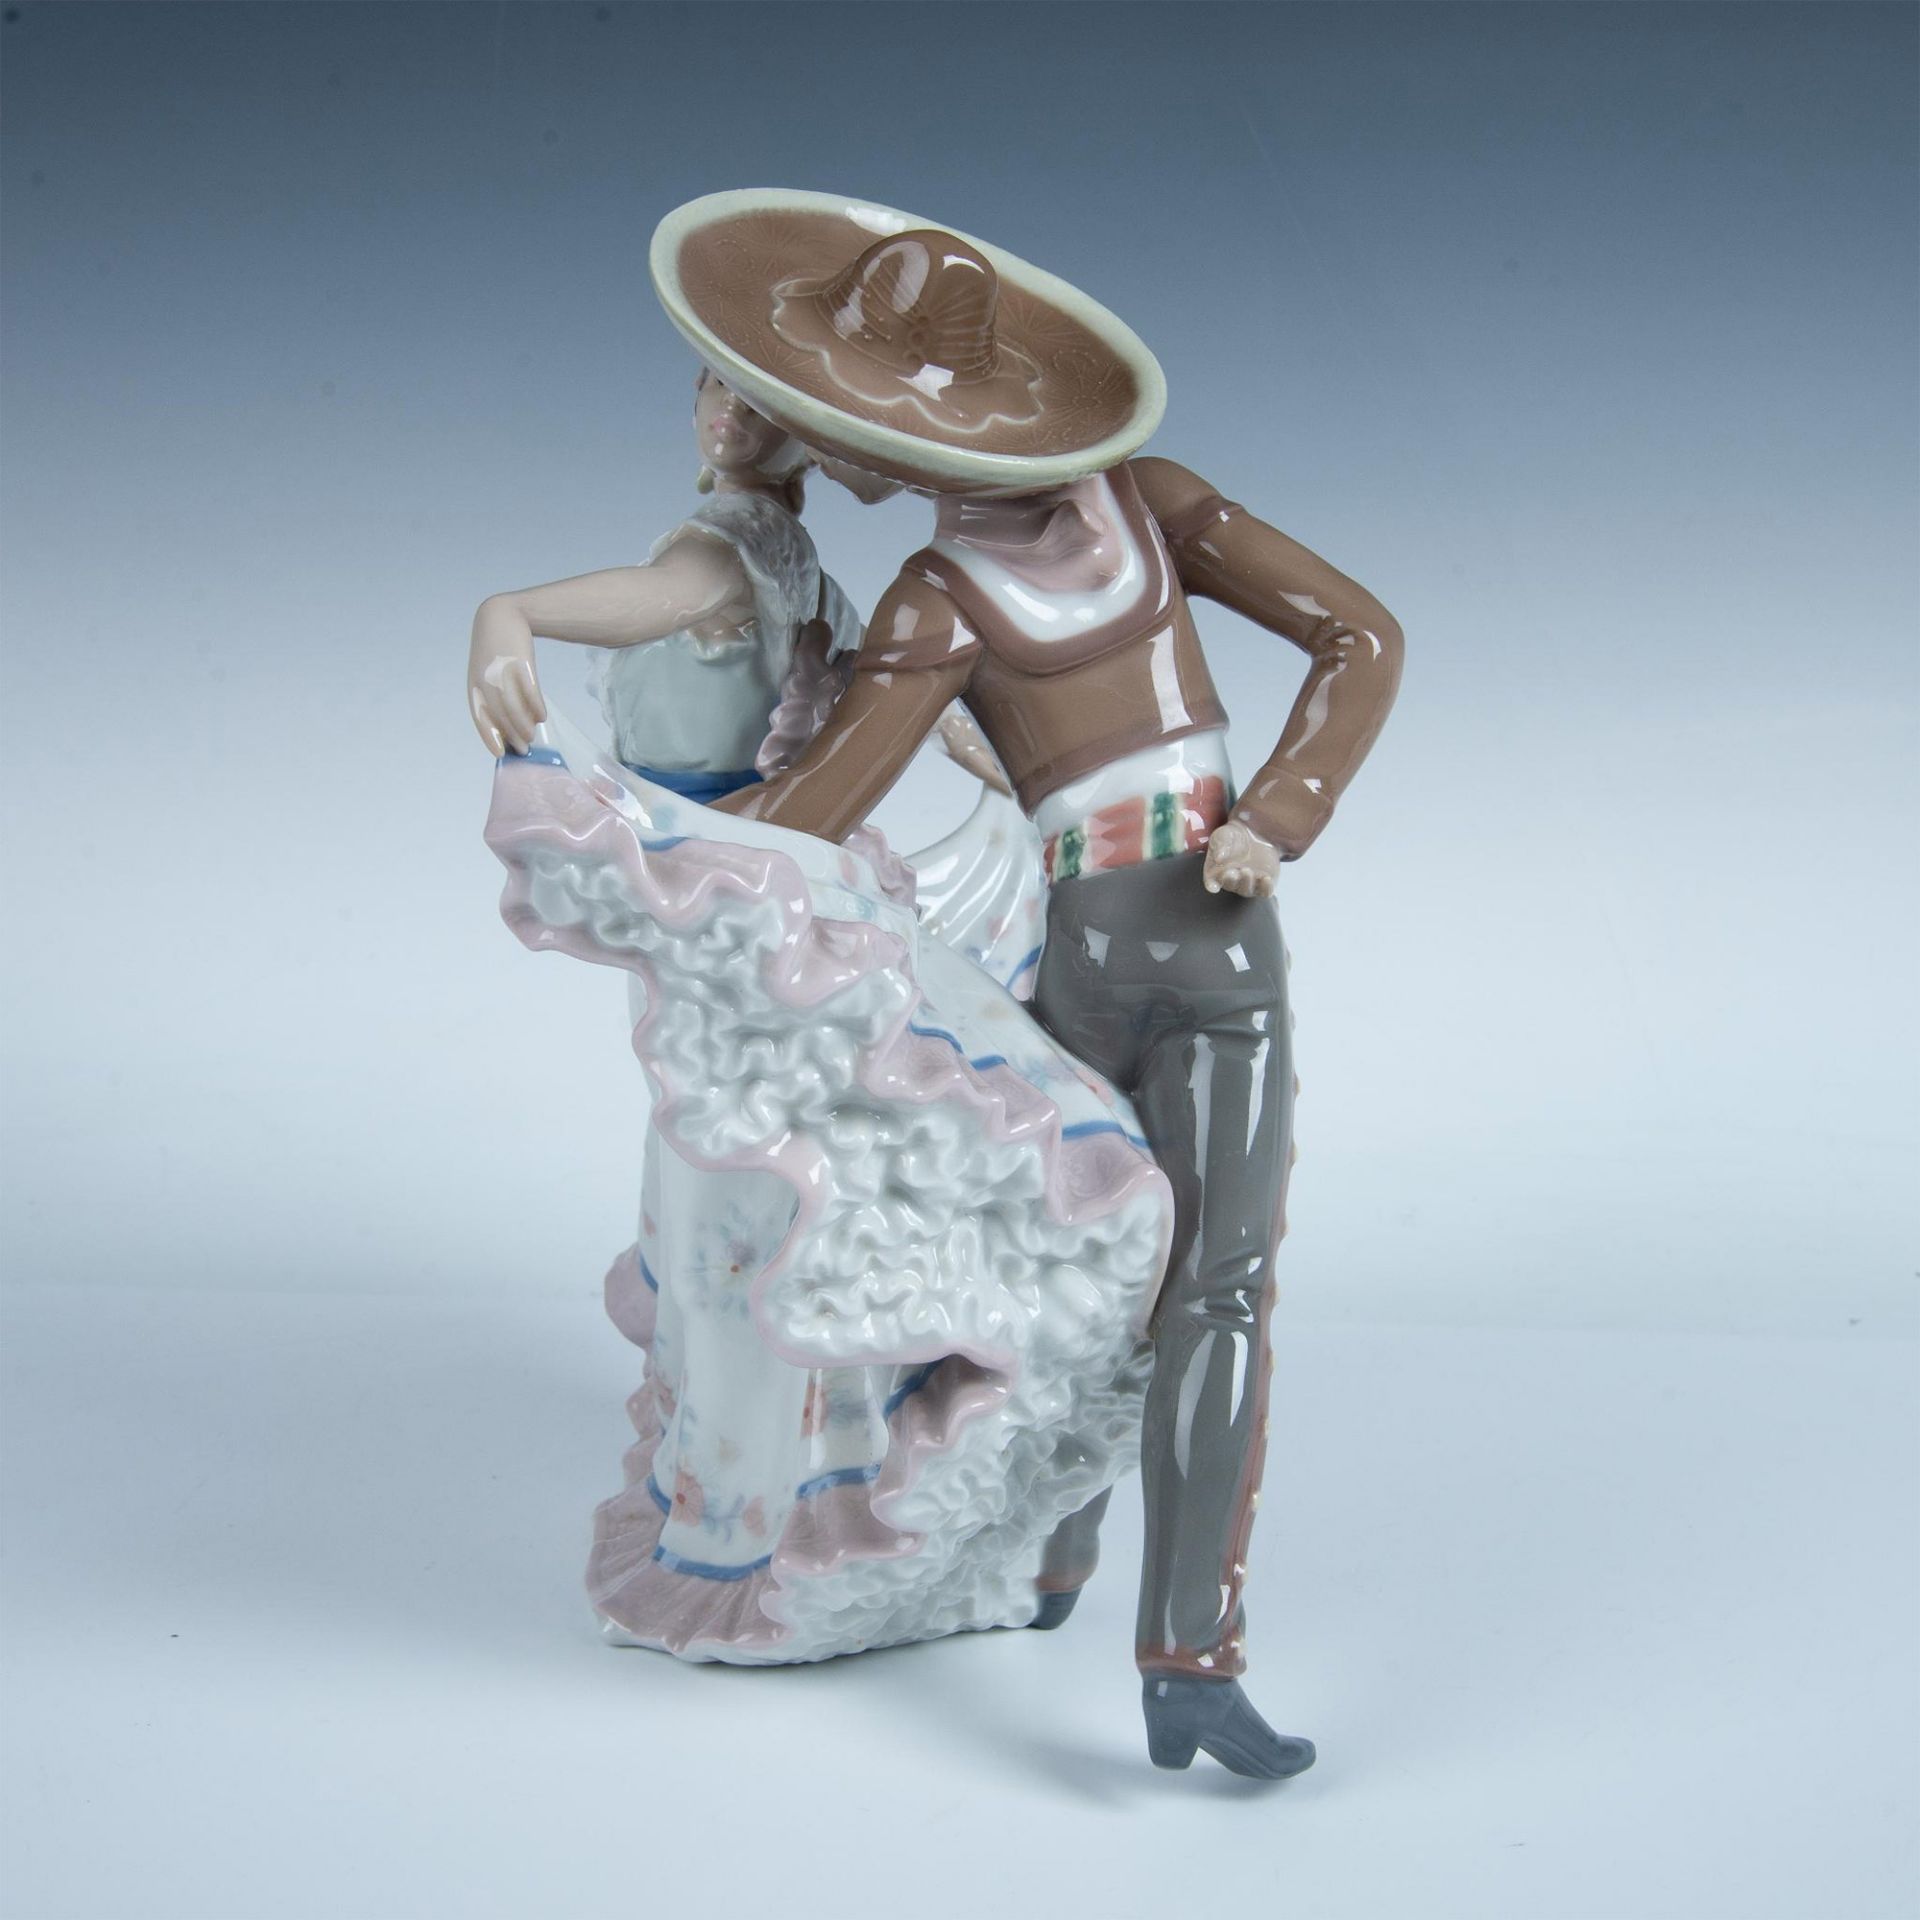 Mexican Dancers 1005415 - Lladro Porcelain Figurine - Image 4 of 8